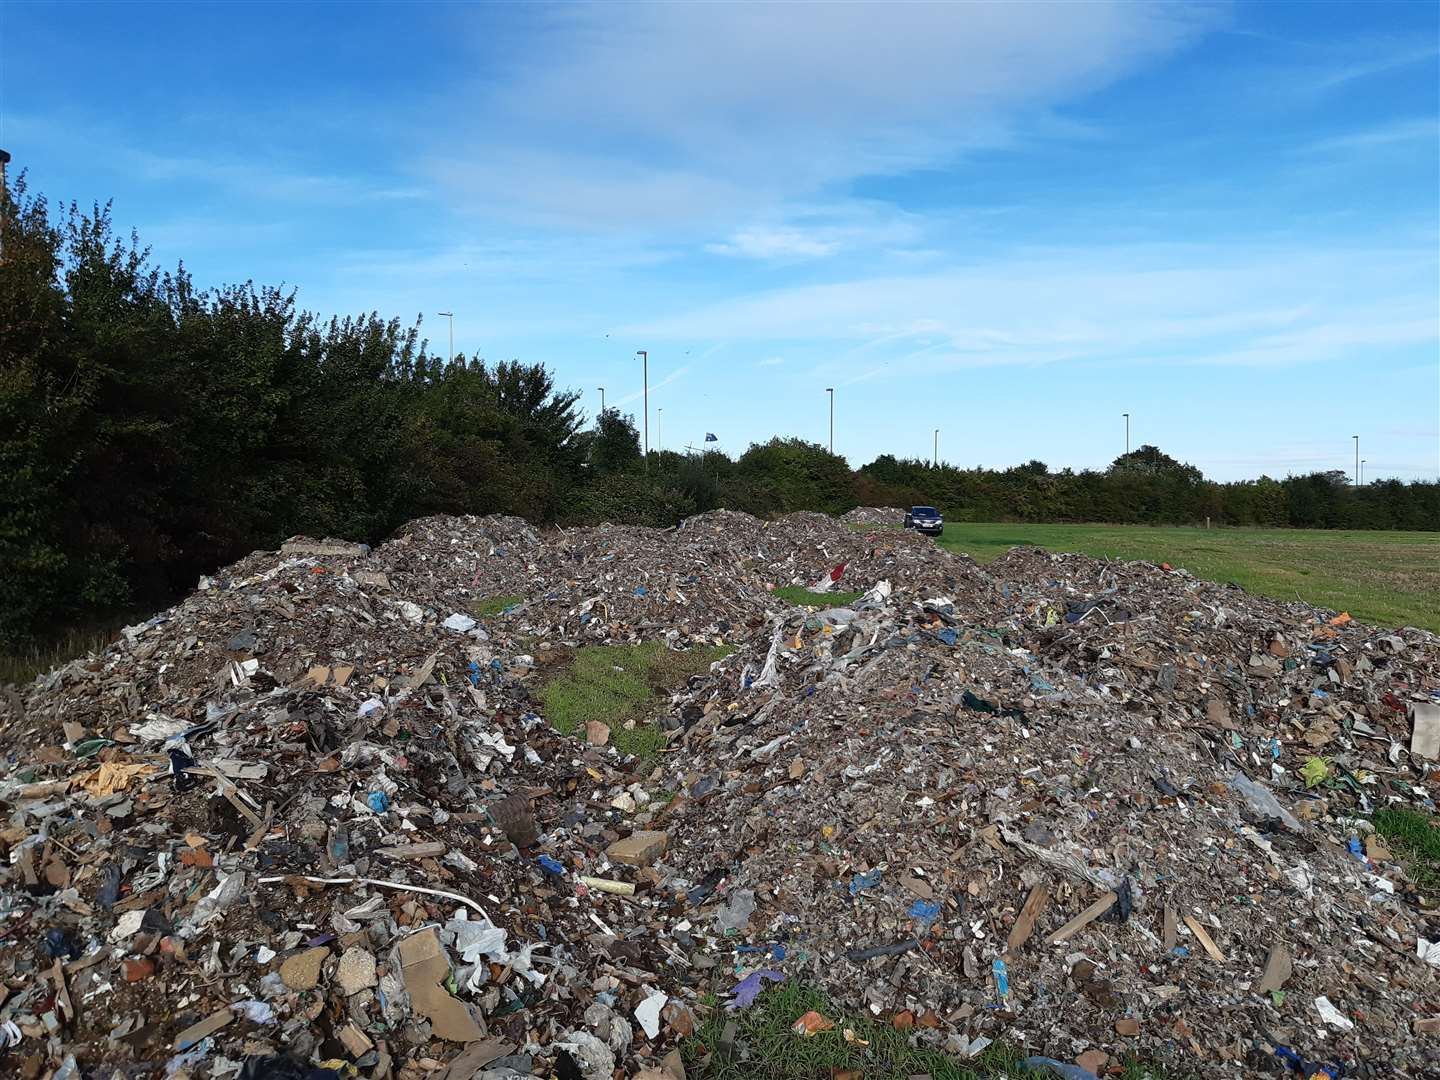 Some of the mounds of rubbish left dumped